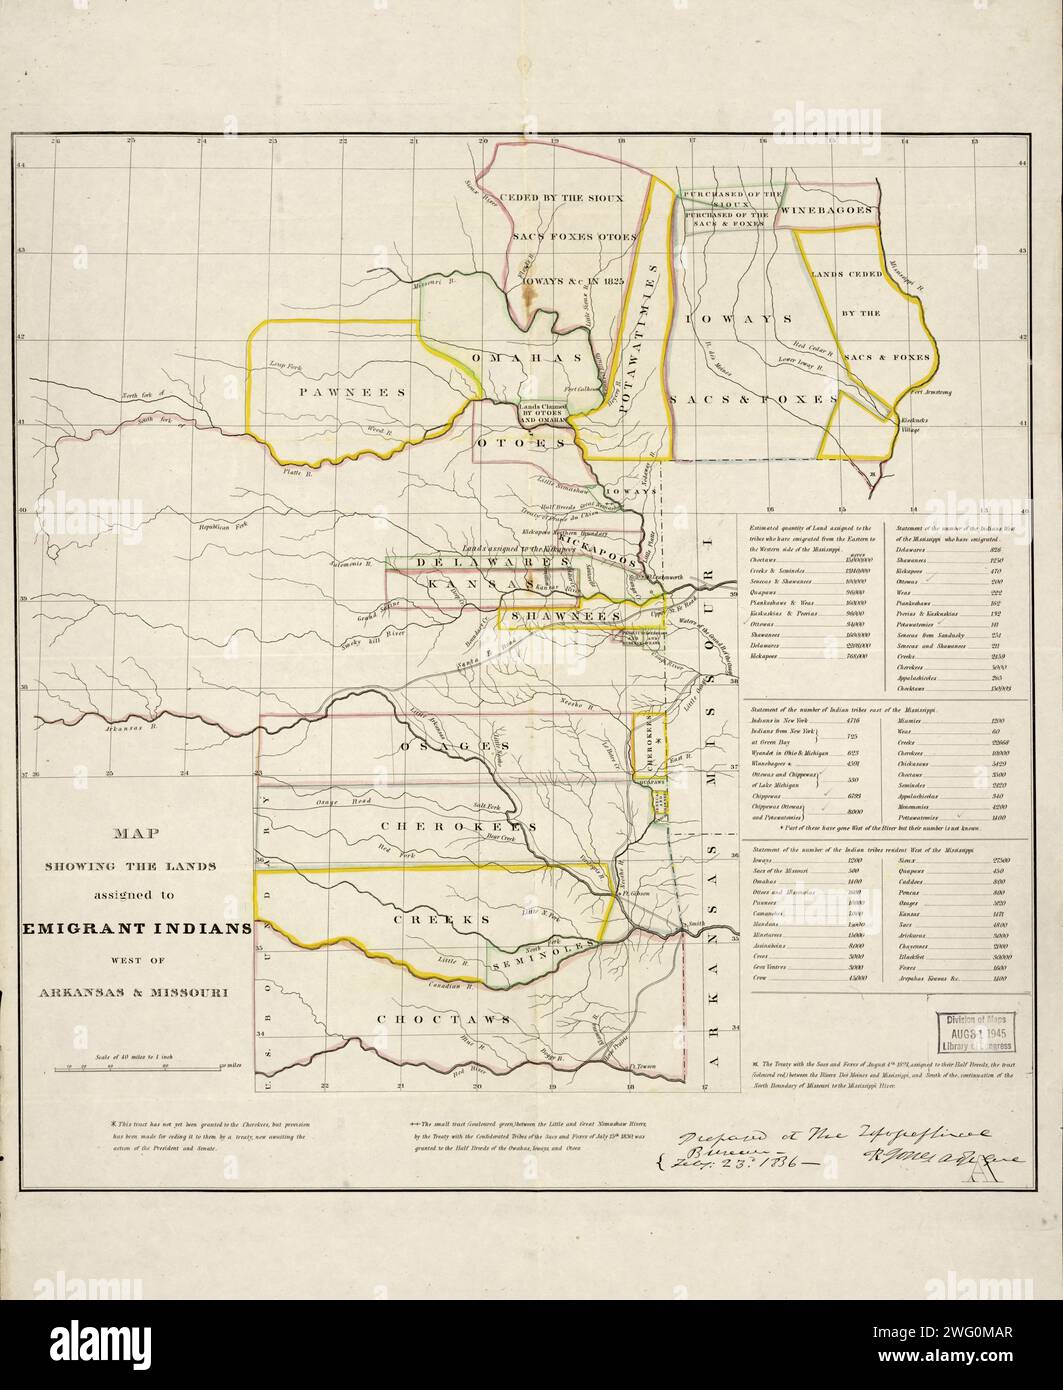 Map showing the lands assigned to emigrant Indians west of Arkansas and Missouri, 1836. Following passage of the Indian Removal Act in 1830, President Andrew Jackson implemented a policy of land exchanges and forced expulsion of the eastern Native Americans to regions west of the Mississippi River.  It  shows the approximate boundaries of the lands assigned to the relocated tribes in territories west of the Mississippi by 1836. Different shades of color are used to indicate the various tribes. The map also shows the southwestern border of the United States with Mexico, which at that time inclu Stock Photo